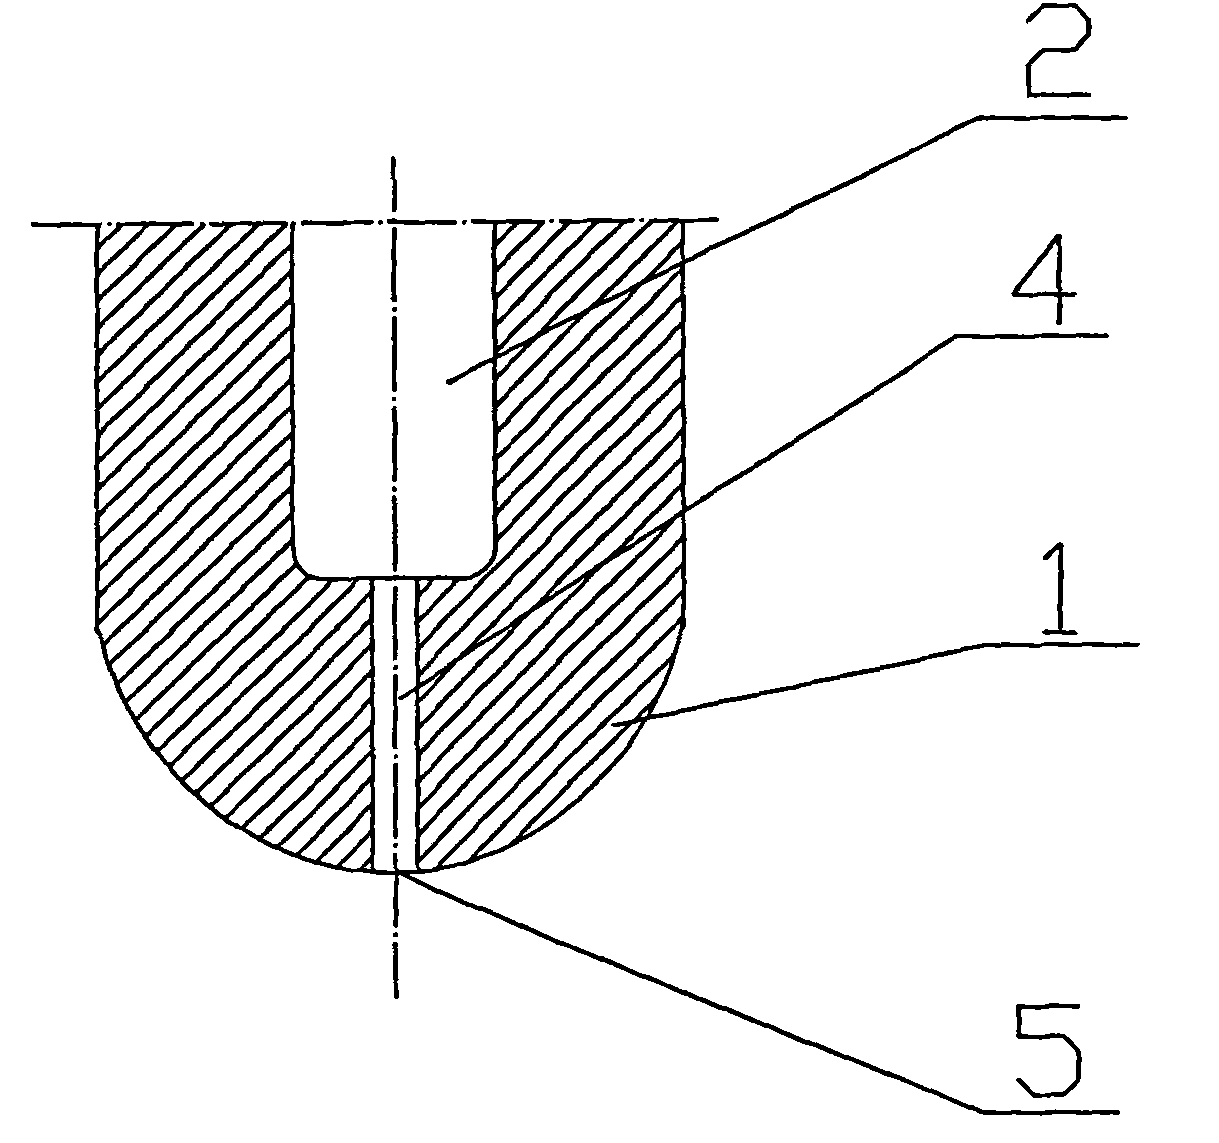 Integral type stopper capable of controlling inflow gas